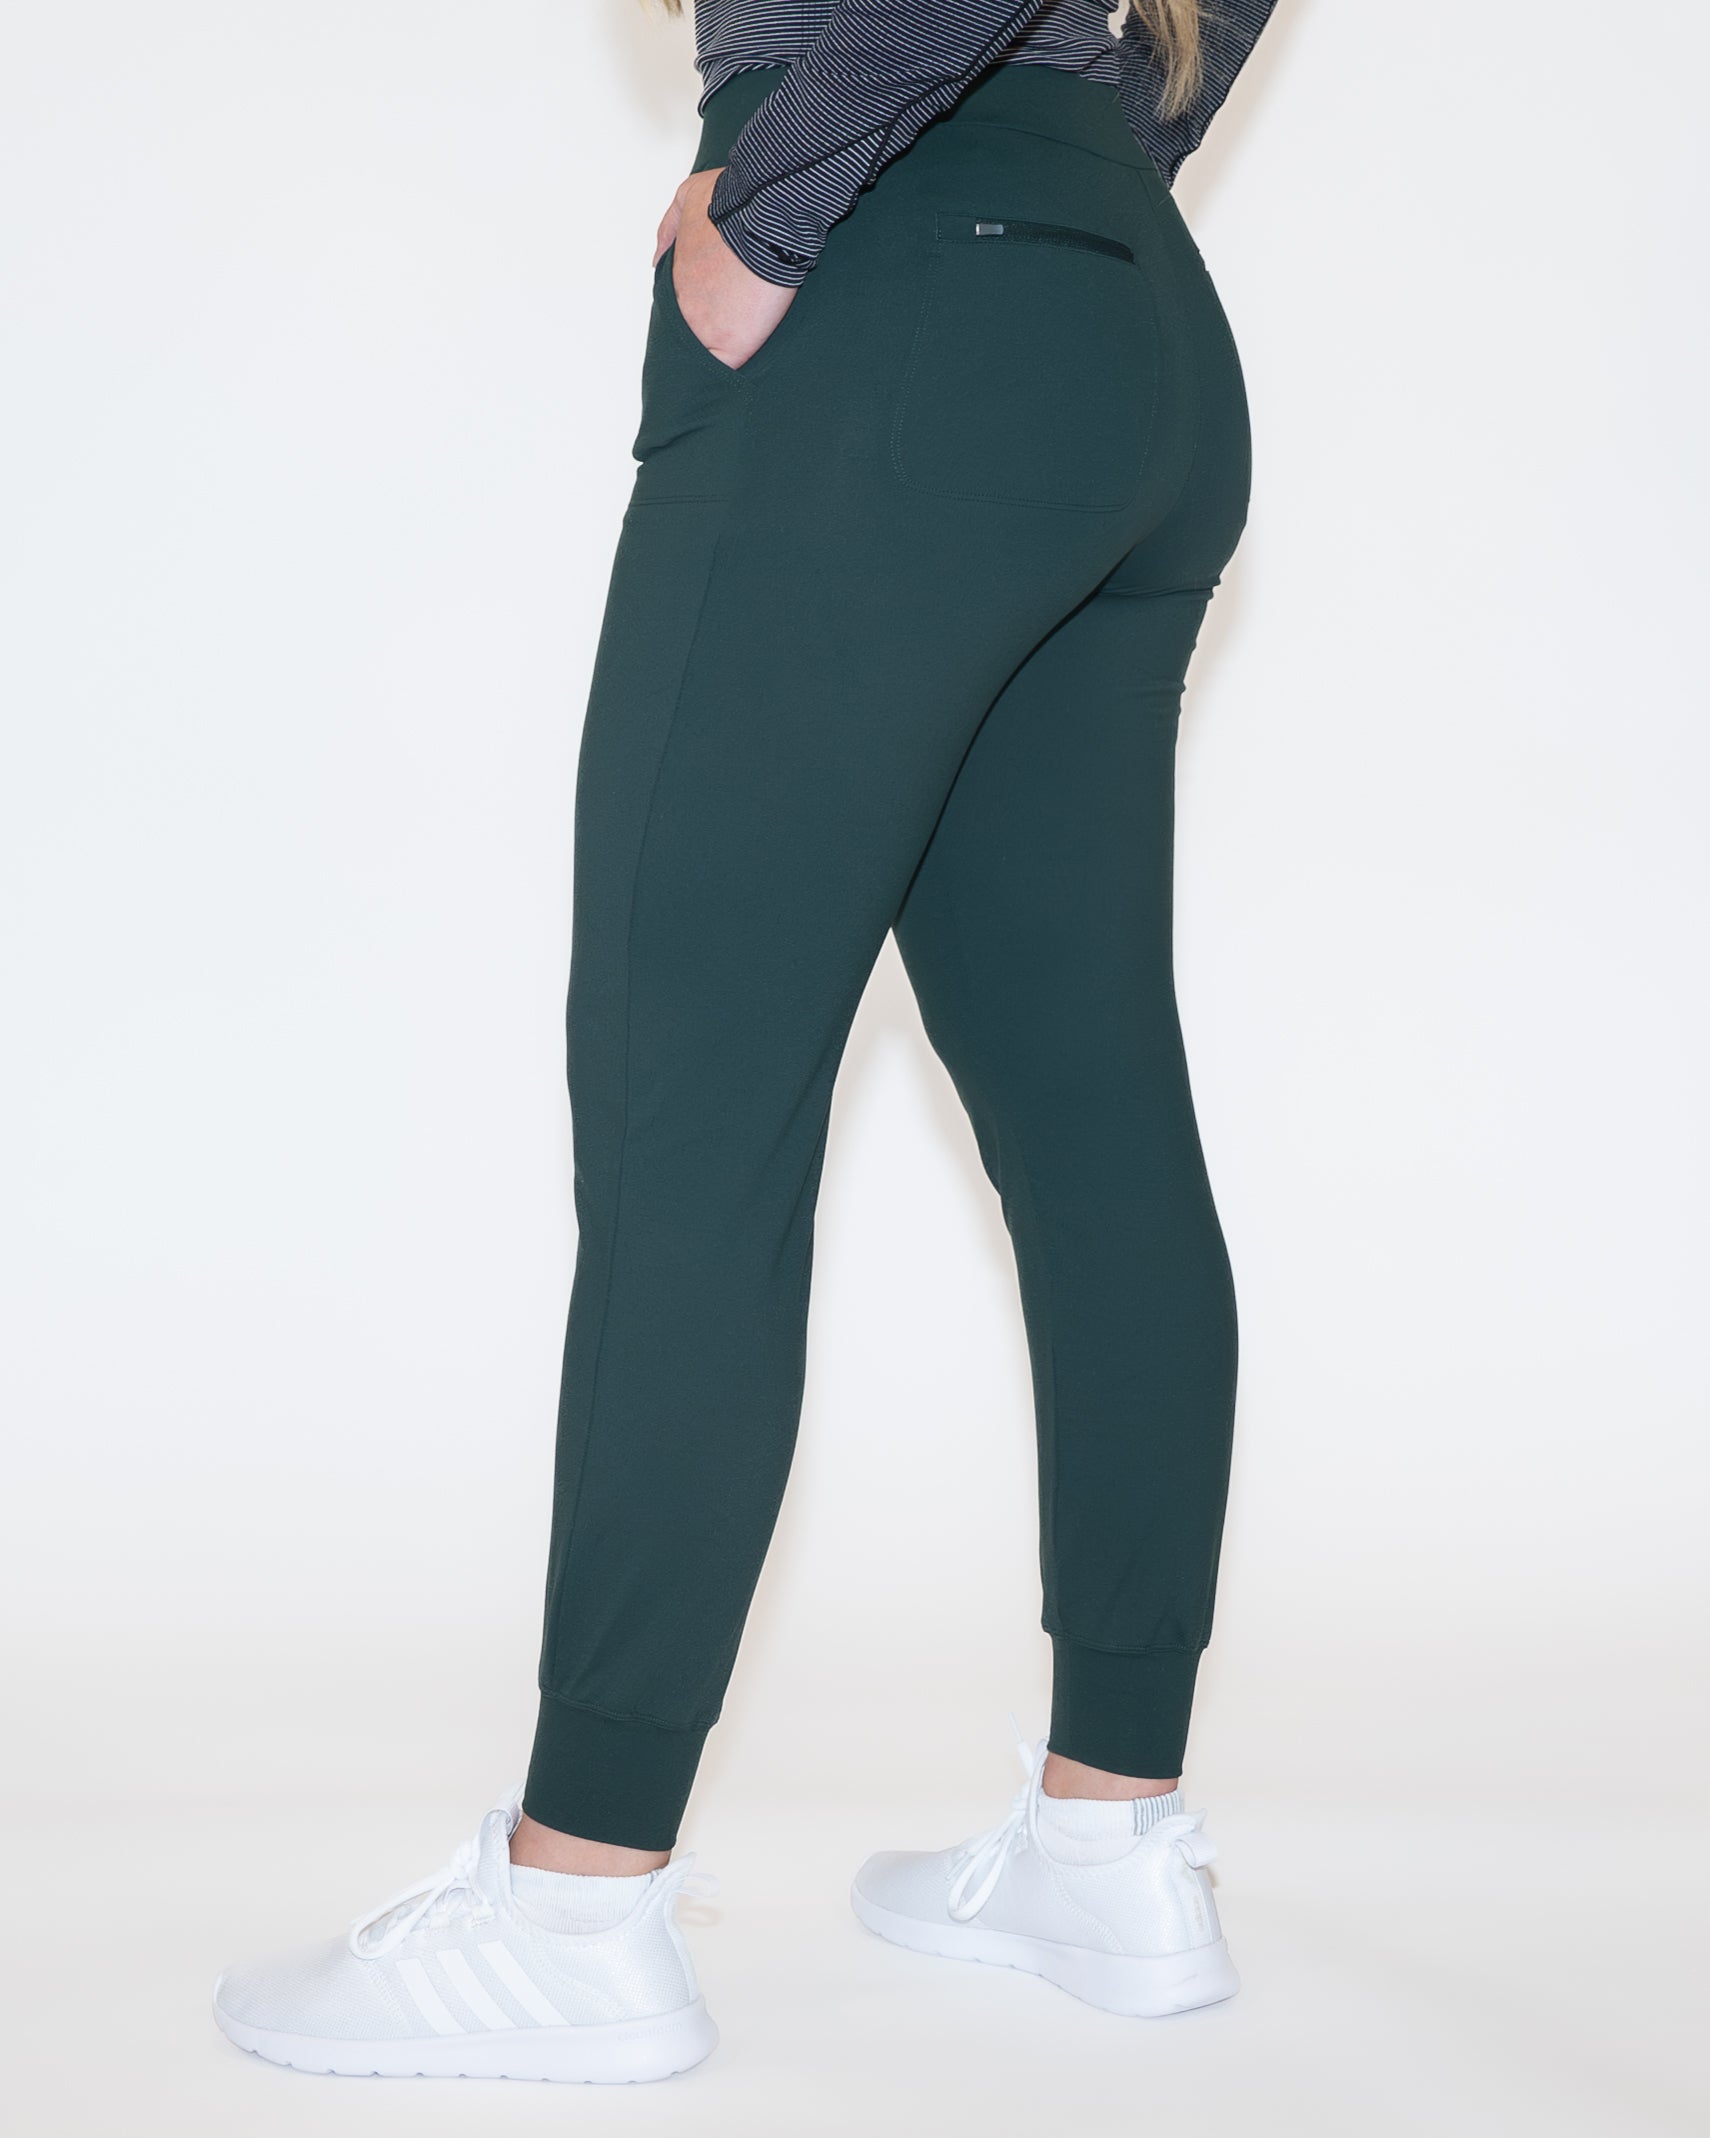 The Work From Home Joggers - Juniper - FINAL SALE